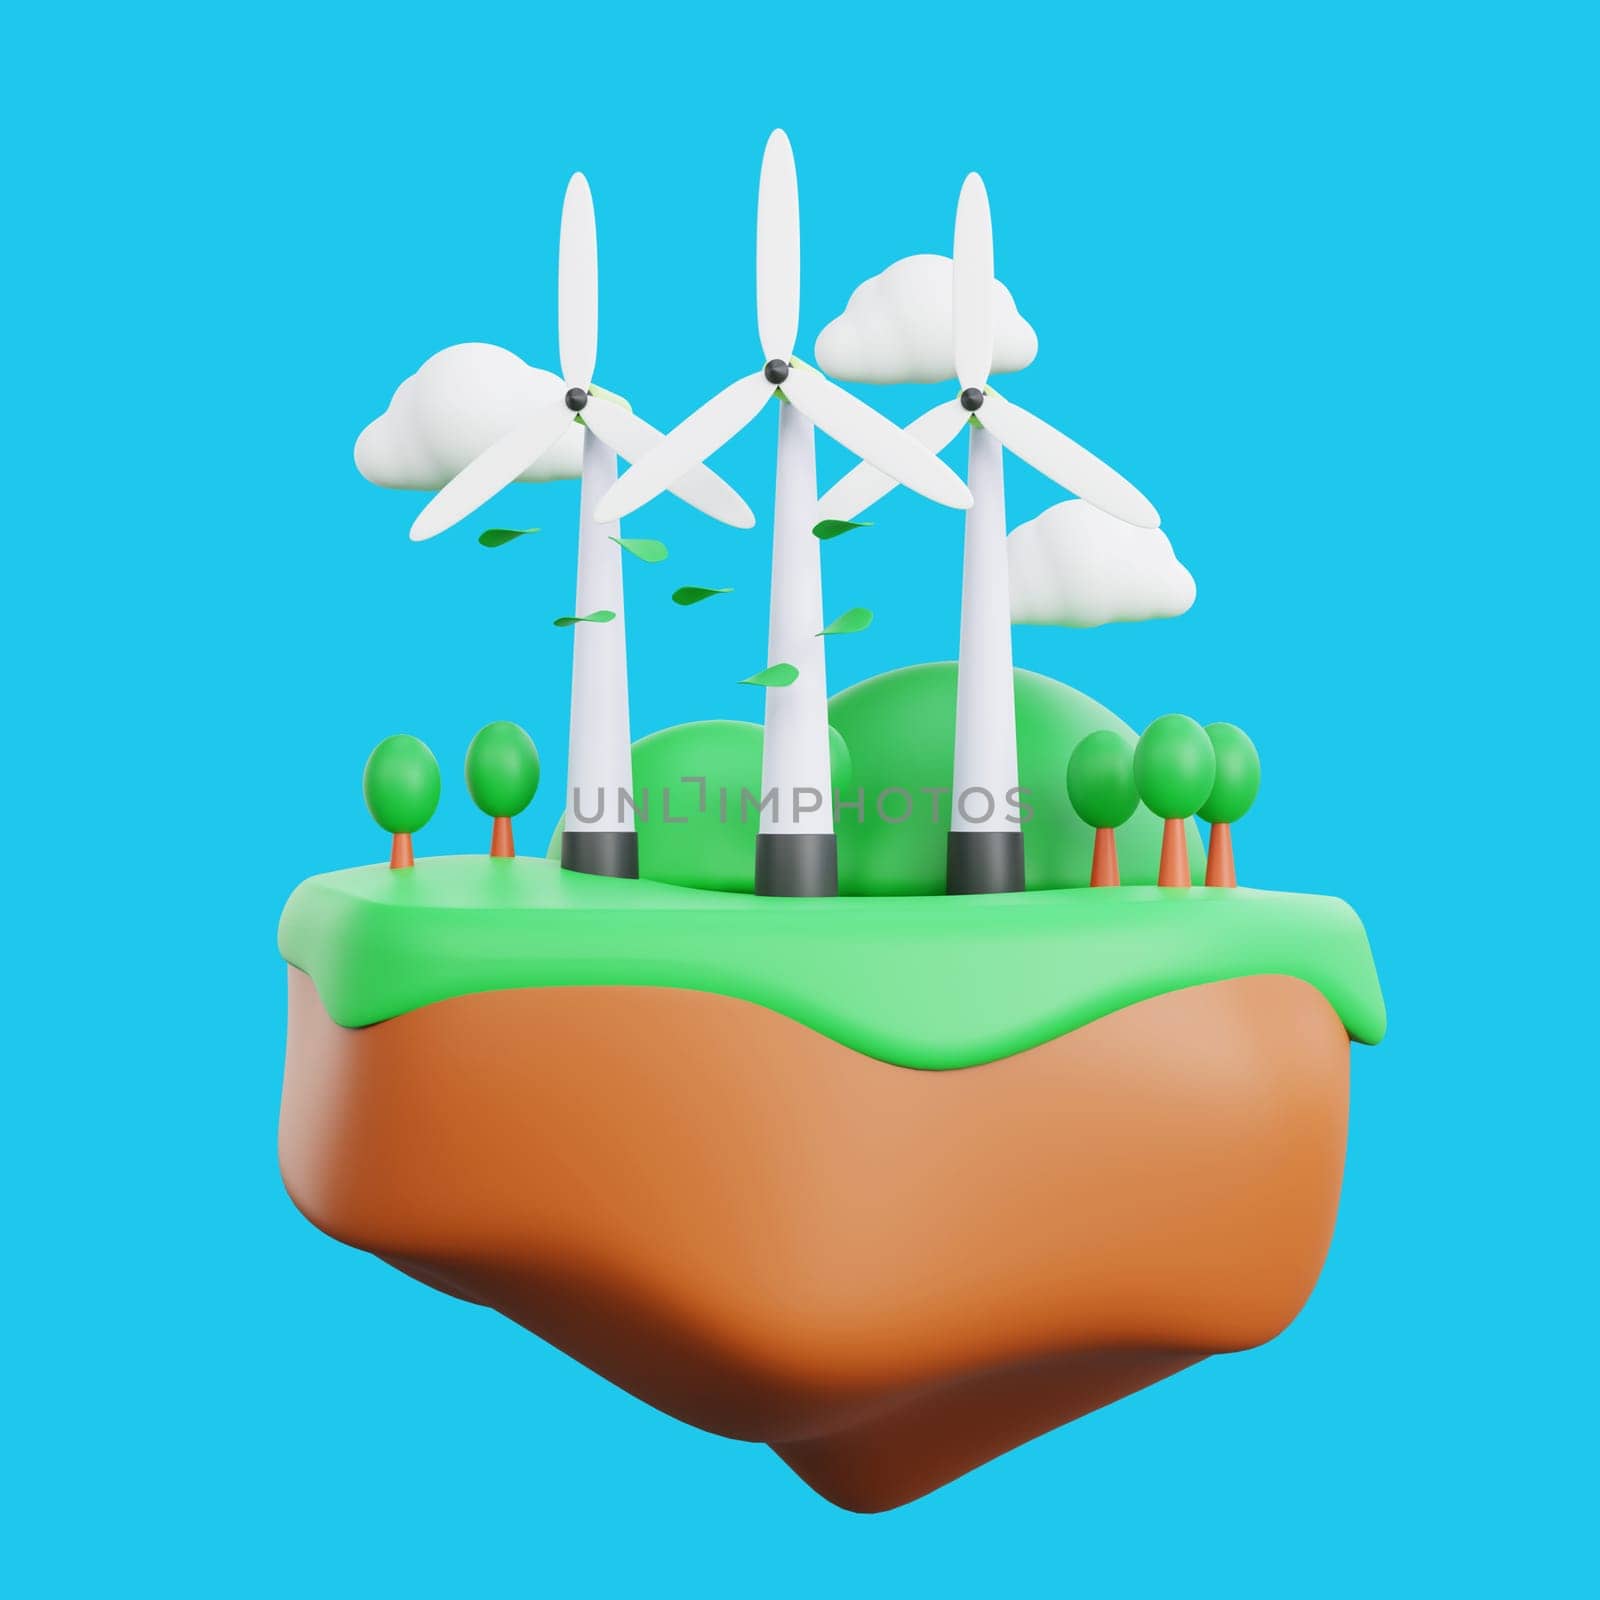 3d rendering of a wind turbine with the concept of ecology and environmentally friendly.